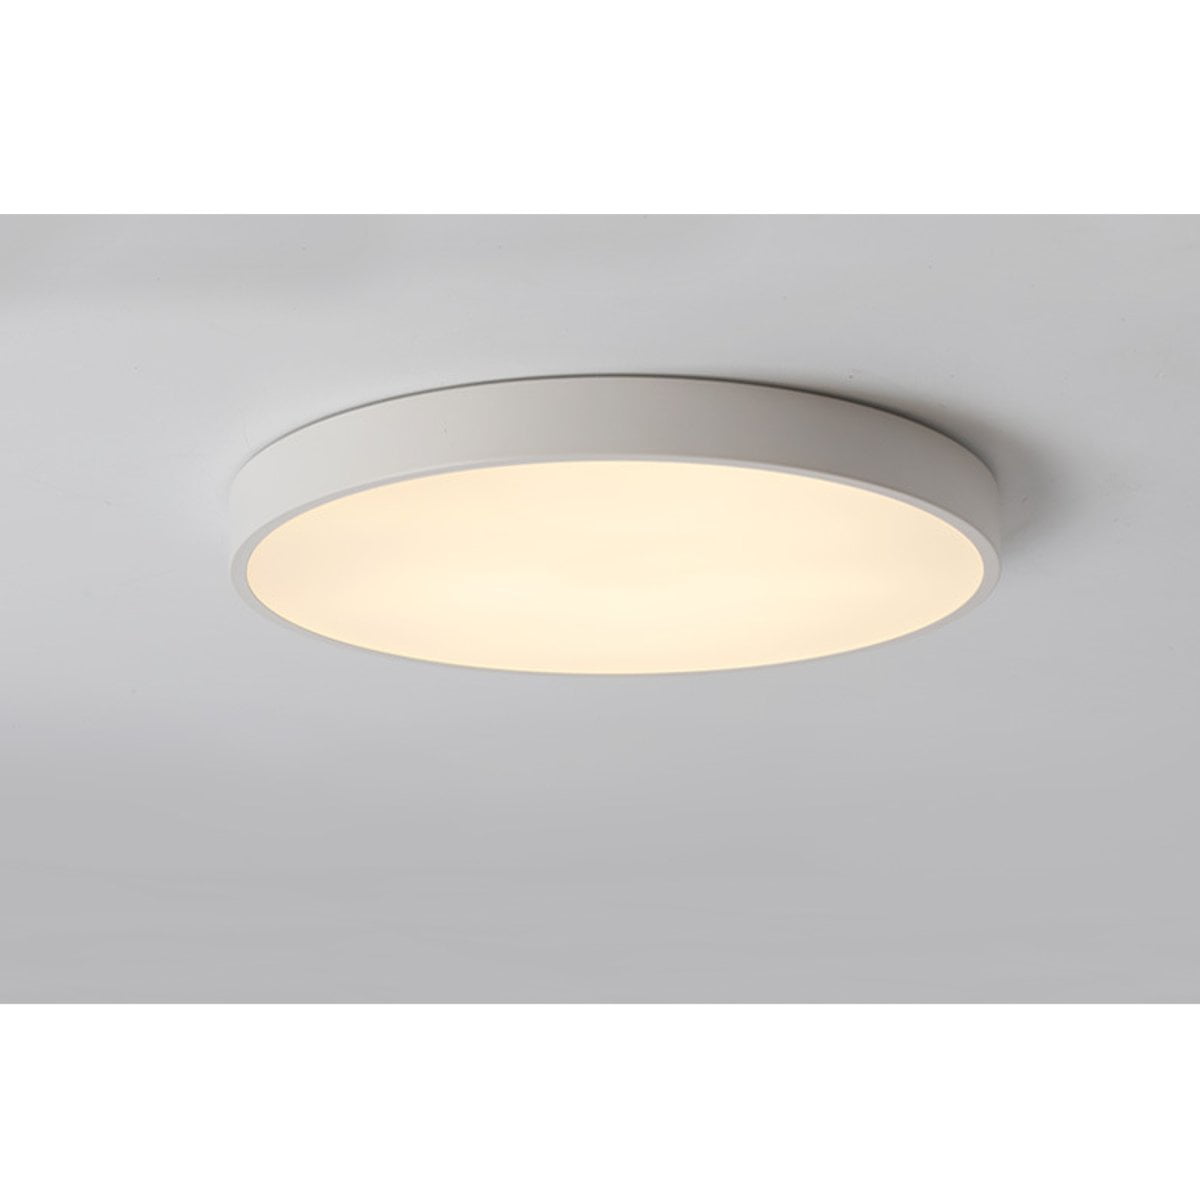 24W 18W 9W Modern Round White LED Flush Mounted Ceiling Lamp Down Light Fixture 